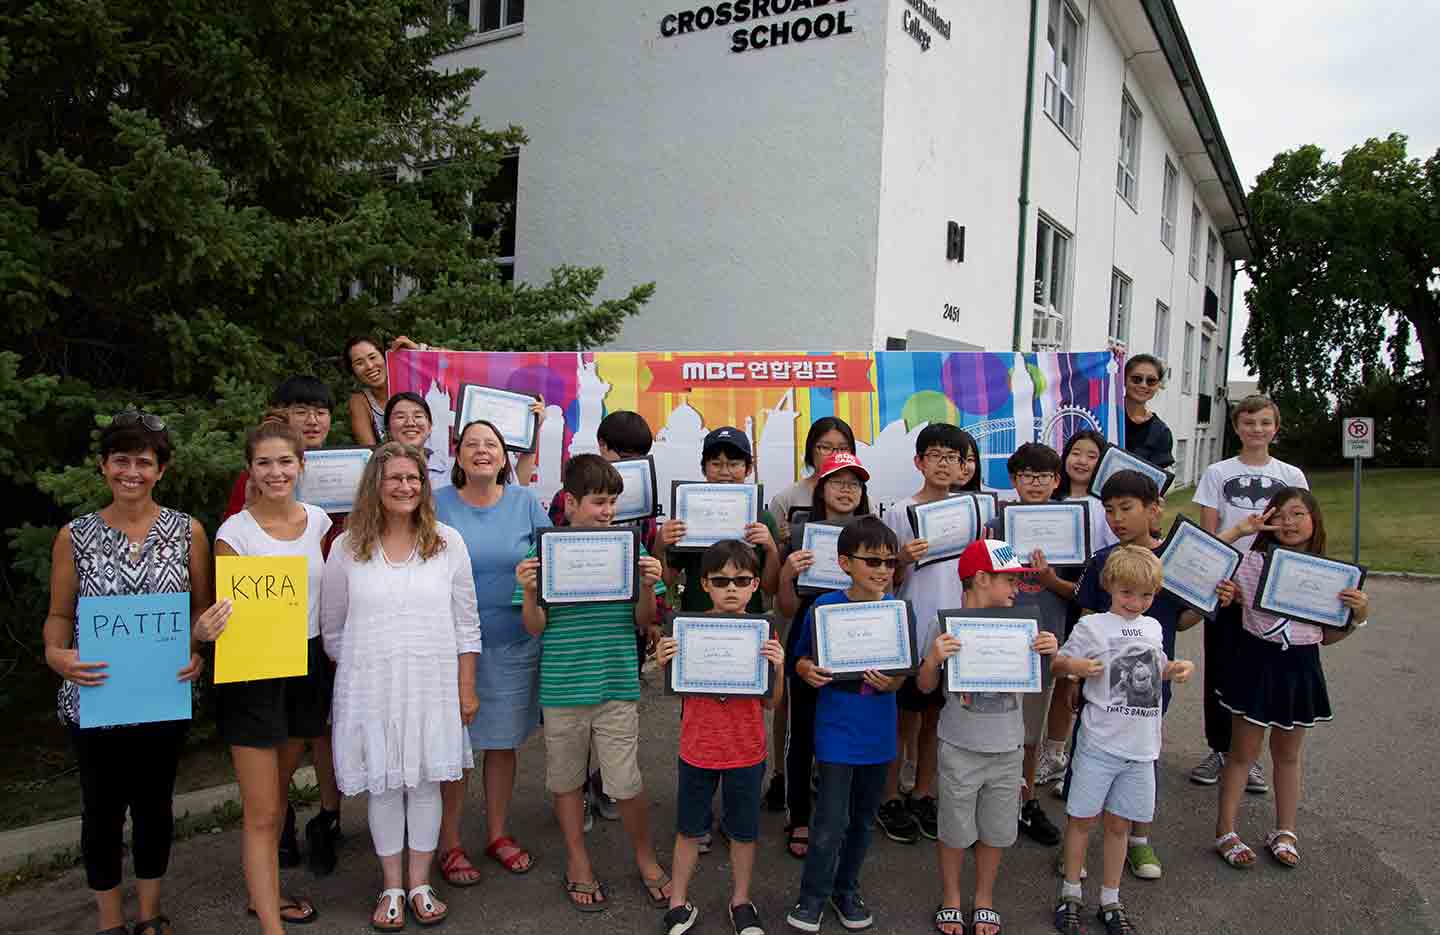 Students receive their certificates outside the school